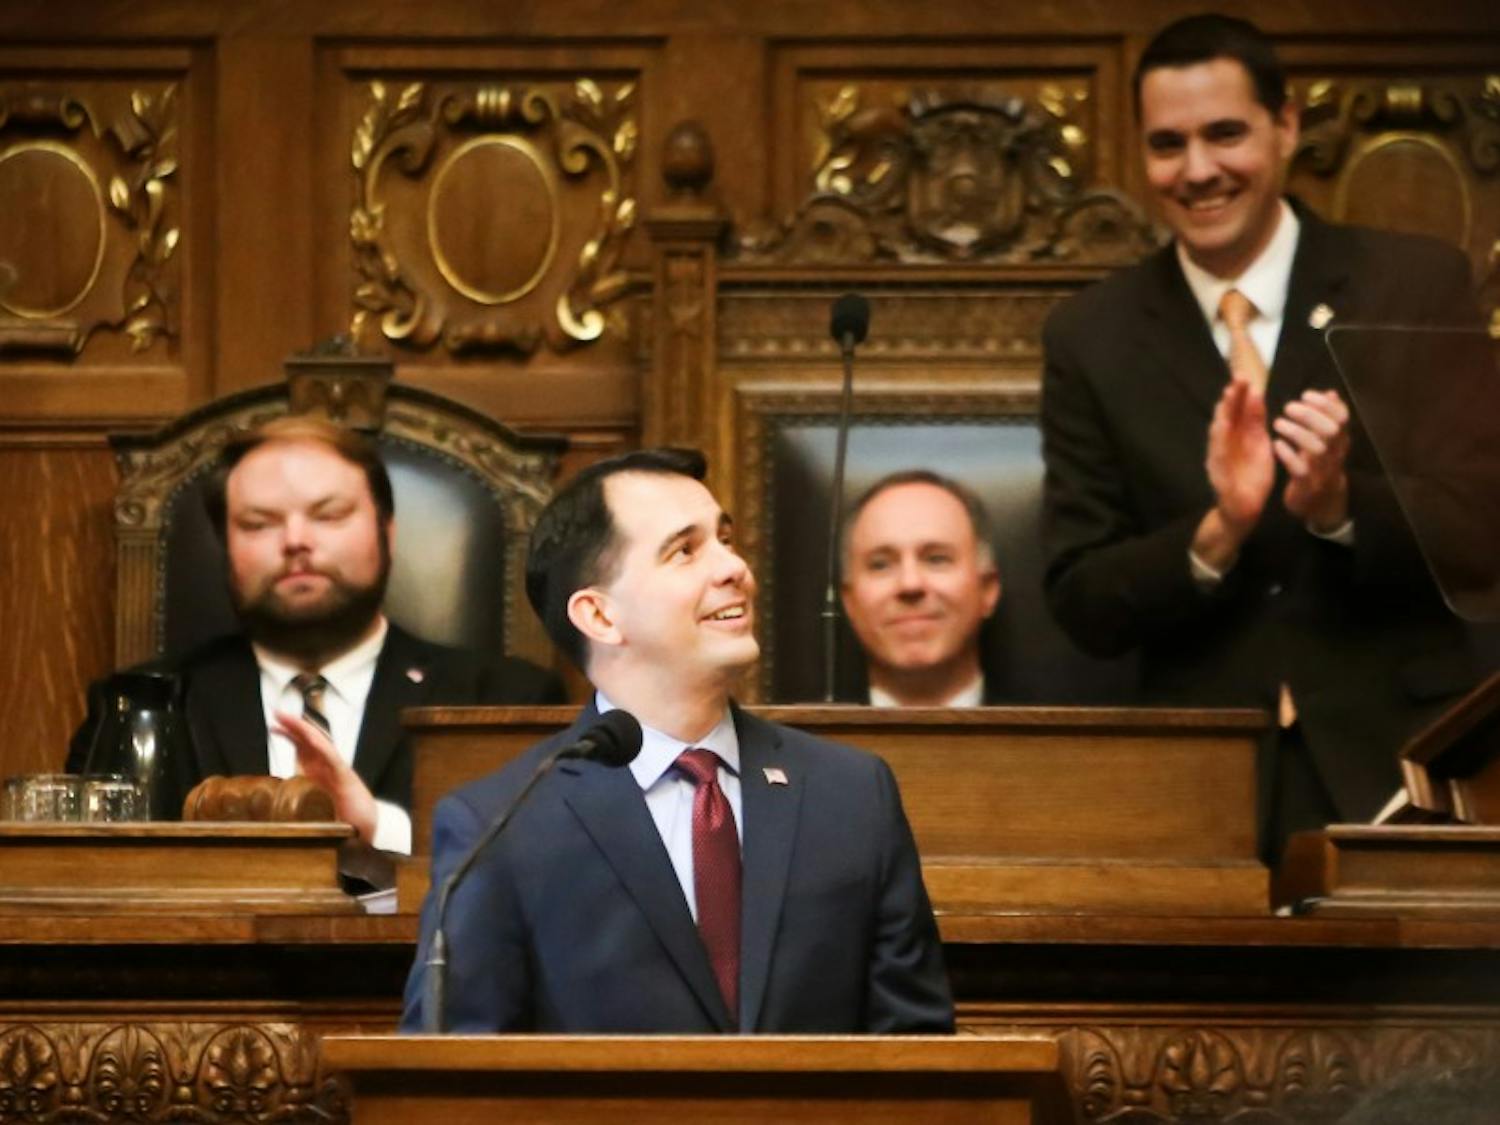 Gov. Scott Walker’s campaign launched digital ads Monday encouraging supporters to write letters to their legislators in support of his budget.